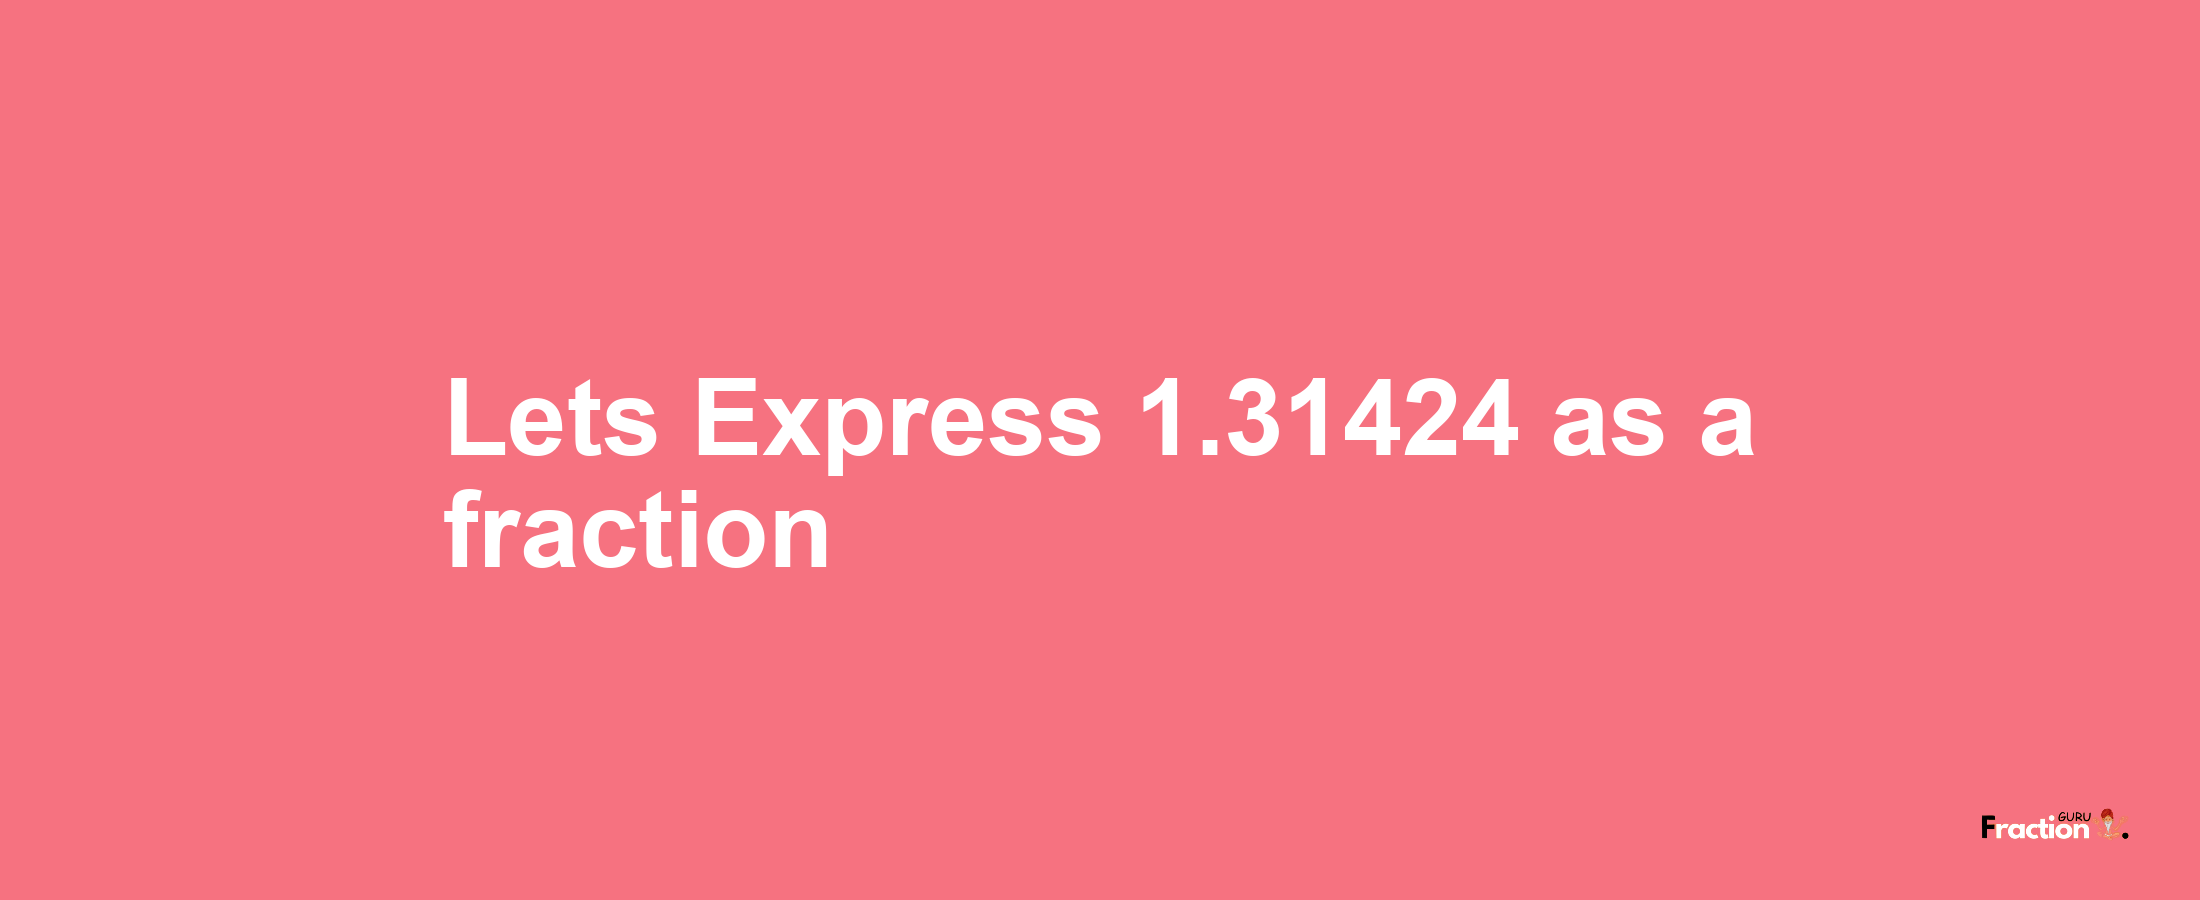 Lets Express 1.31424 as afraction